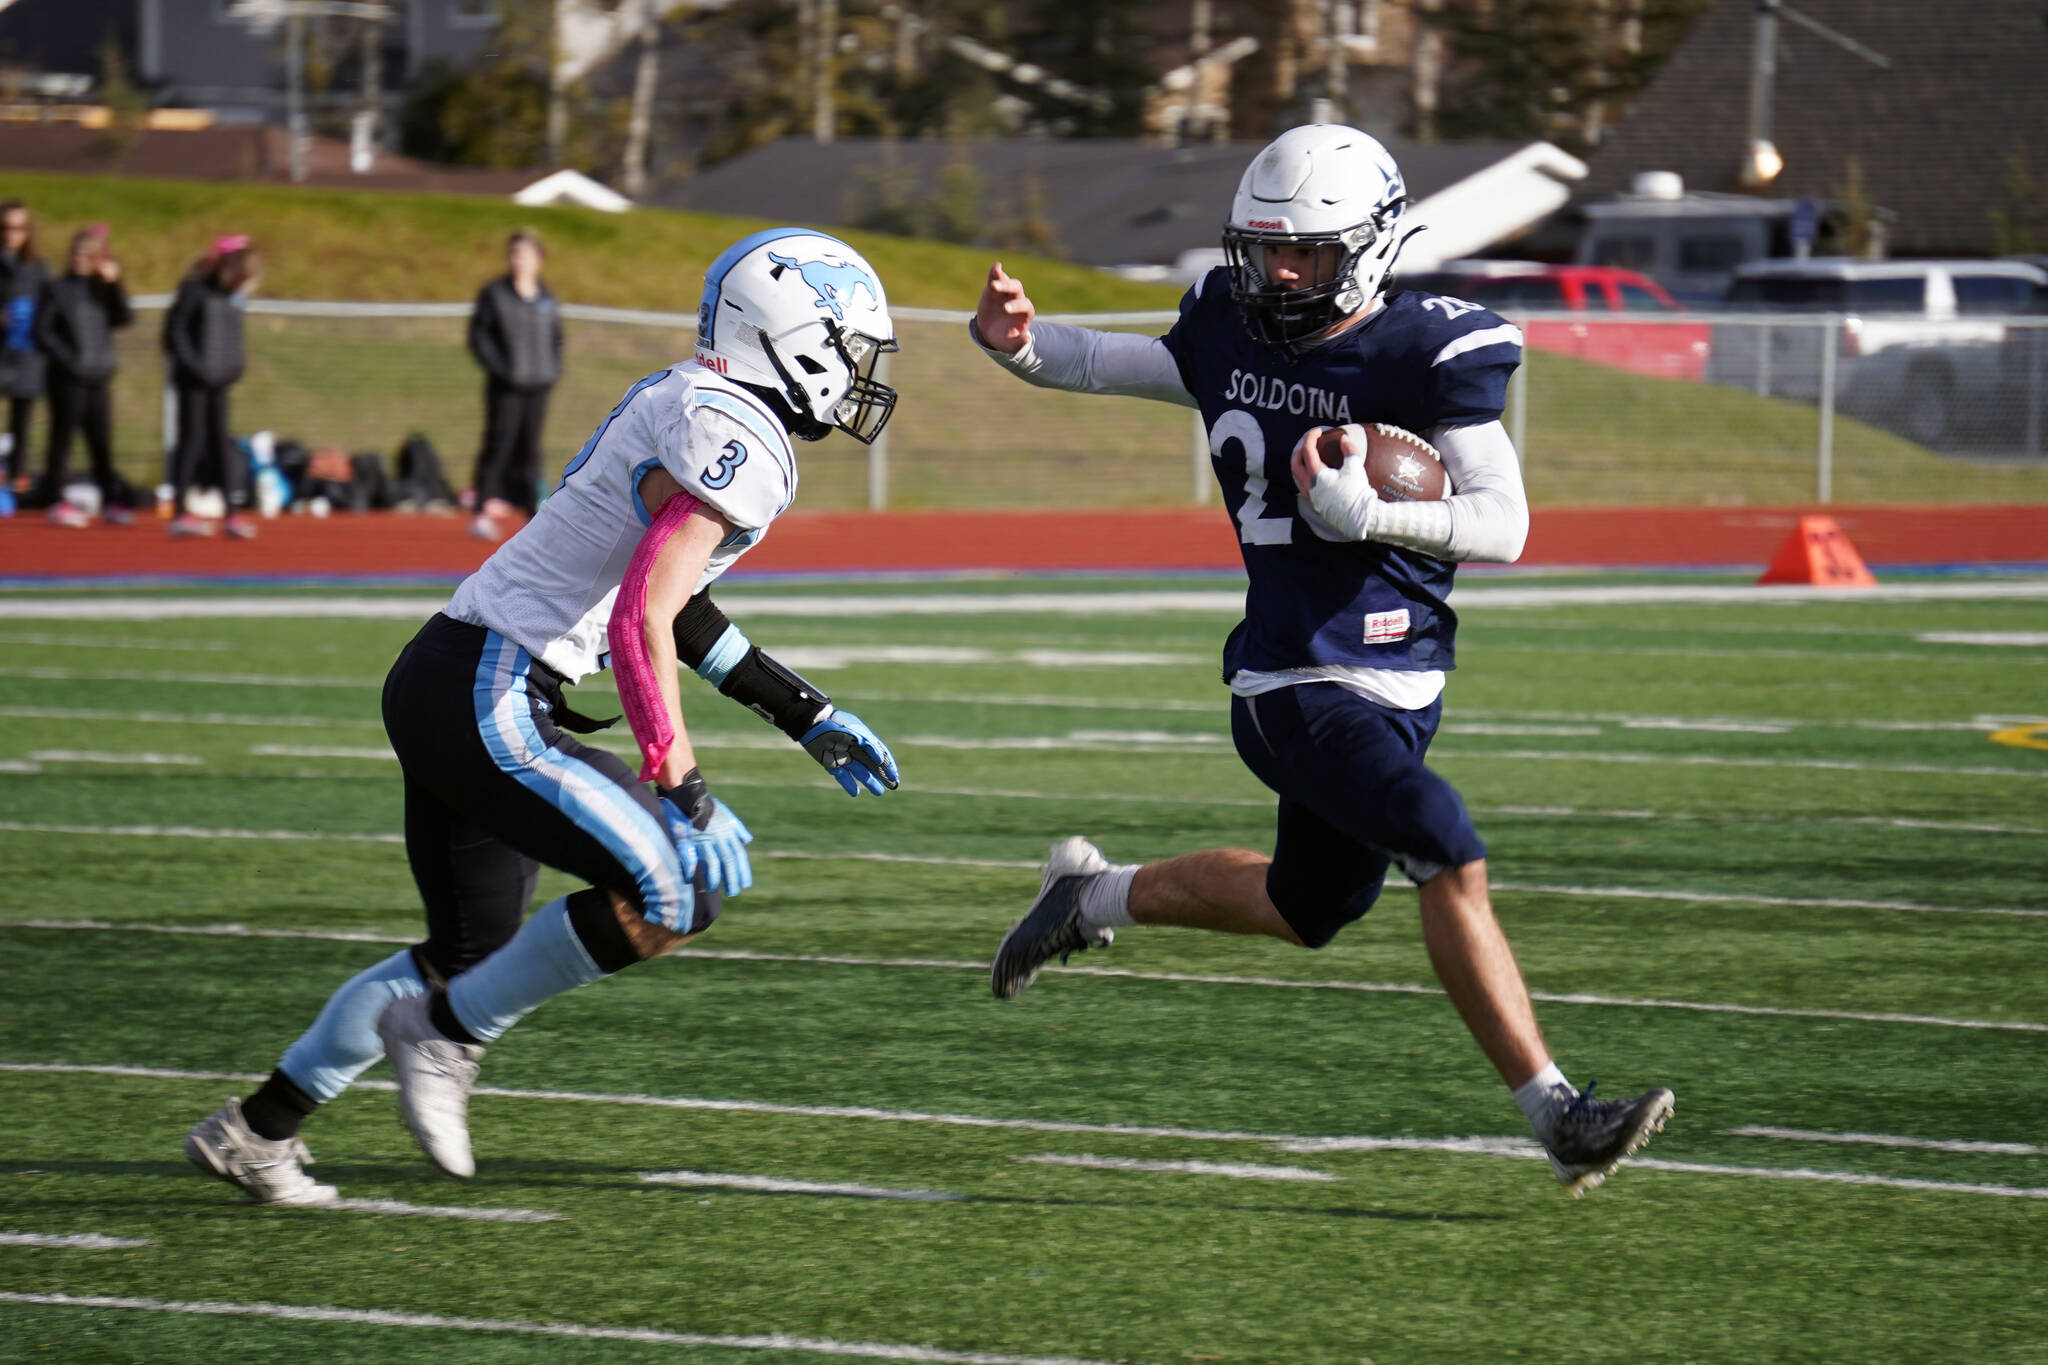 Soldotna's Wyatt Faircloth runs with the ball while fending off Chugiak's Luke Poland during a Division II playoff game at Justin Maile Field in Soldotna, Alaska, on Saturday, Oct. 7, 2023. (Jake Dye/Peninsula Clarion)